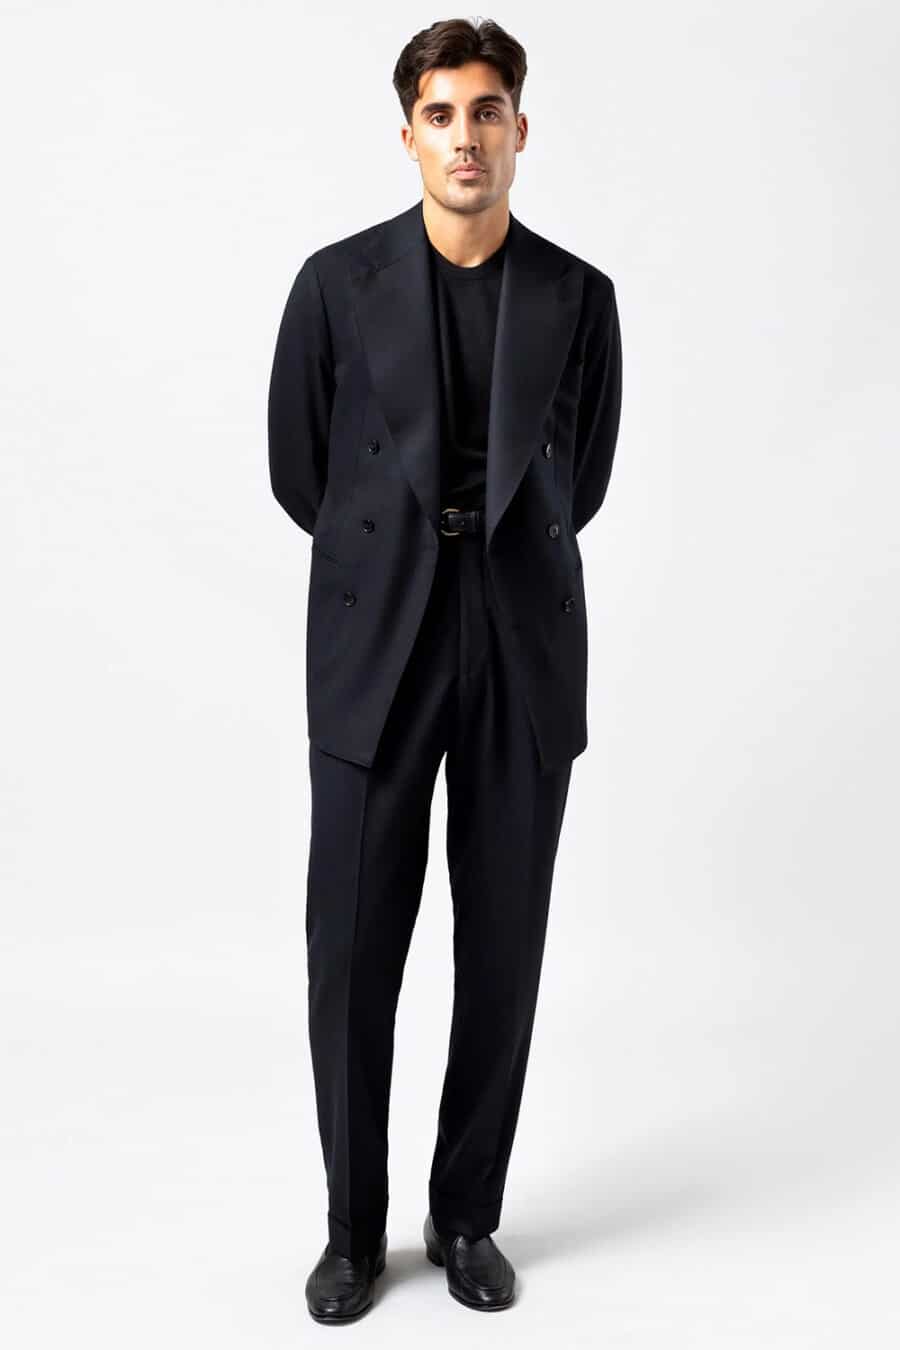 Men's navy double-breasted suit, navy T-shirt and black shoes outfit